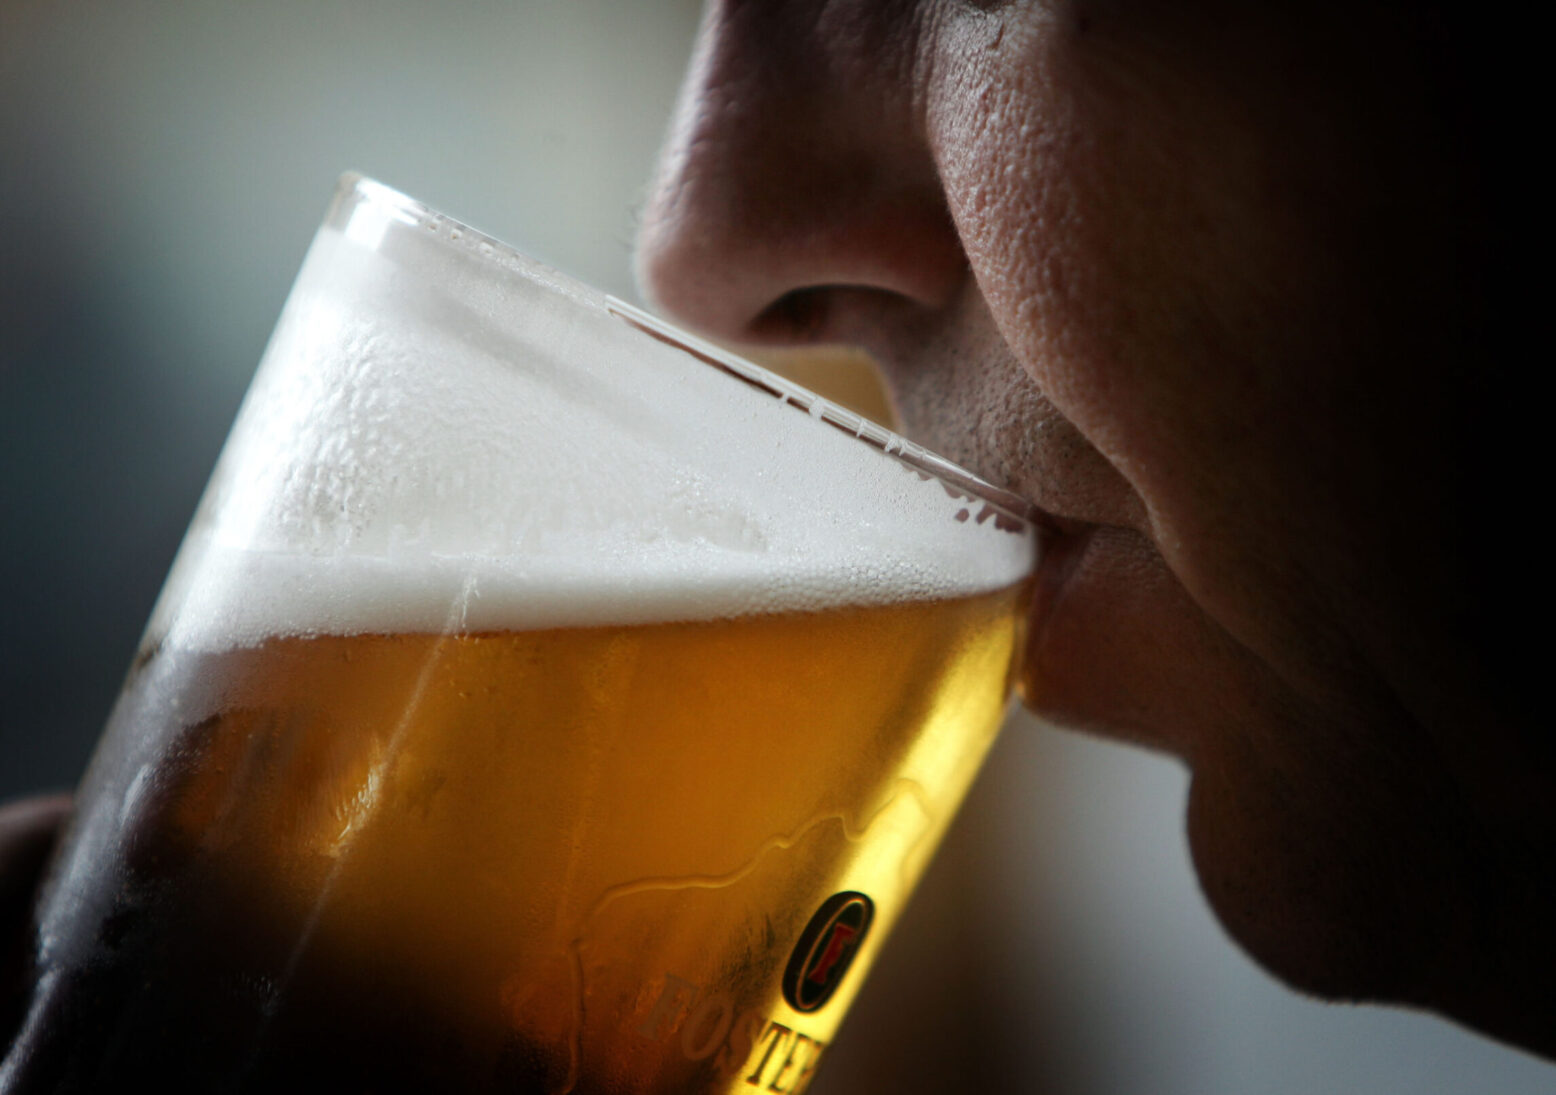 GBR: Binge Drinking Causes Health and Anti Social Concerns